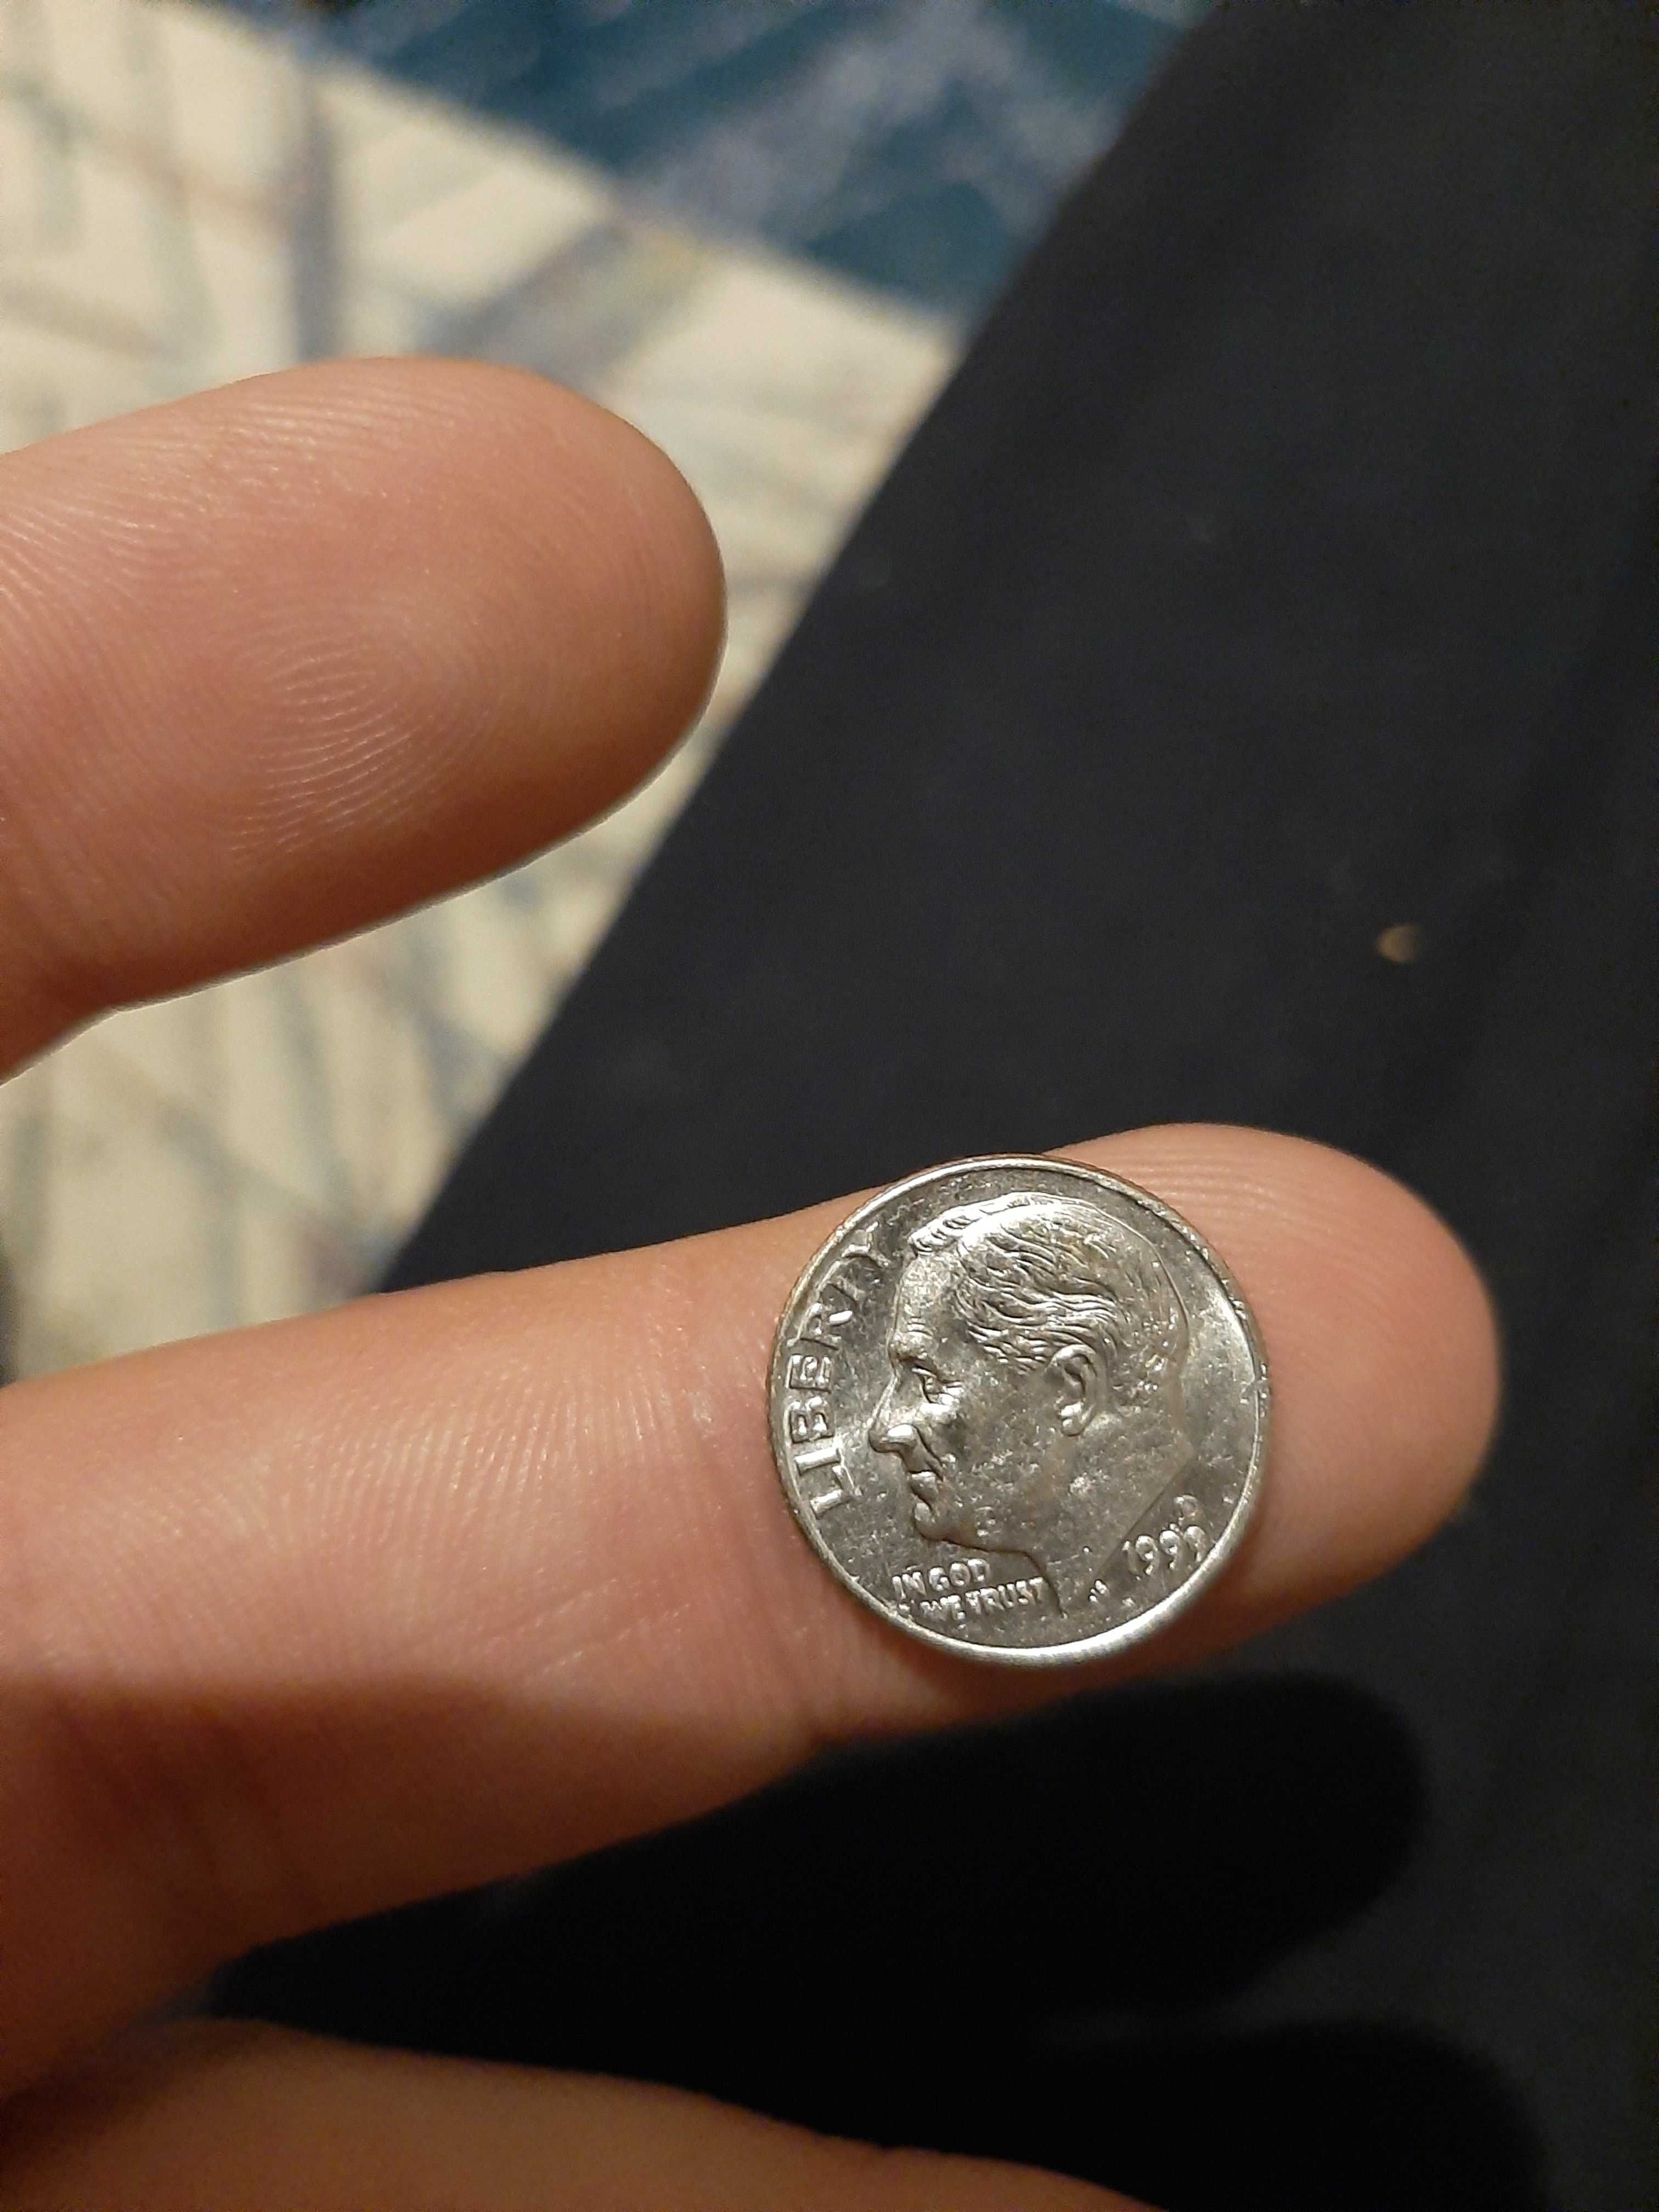 One dime mint condition 1999